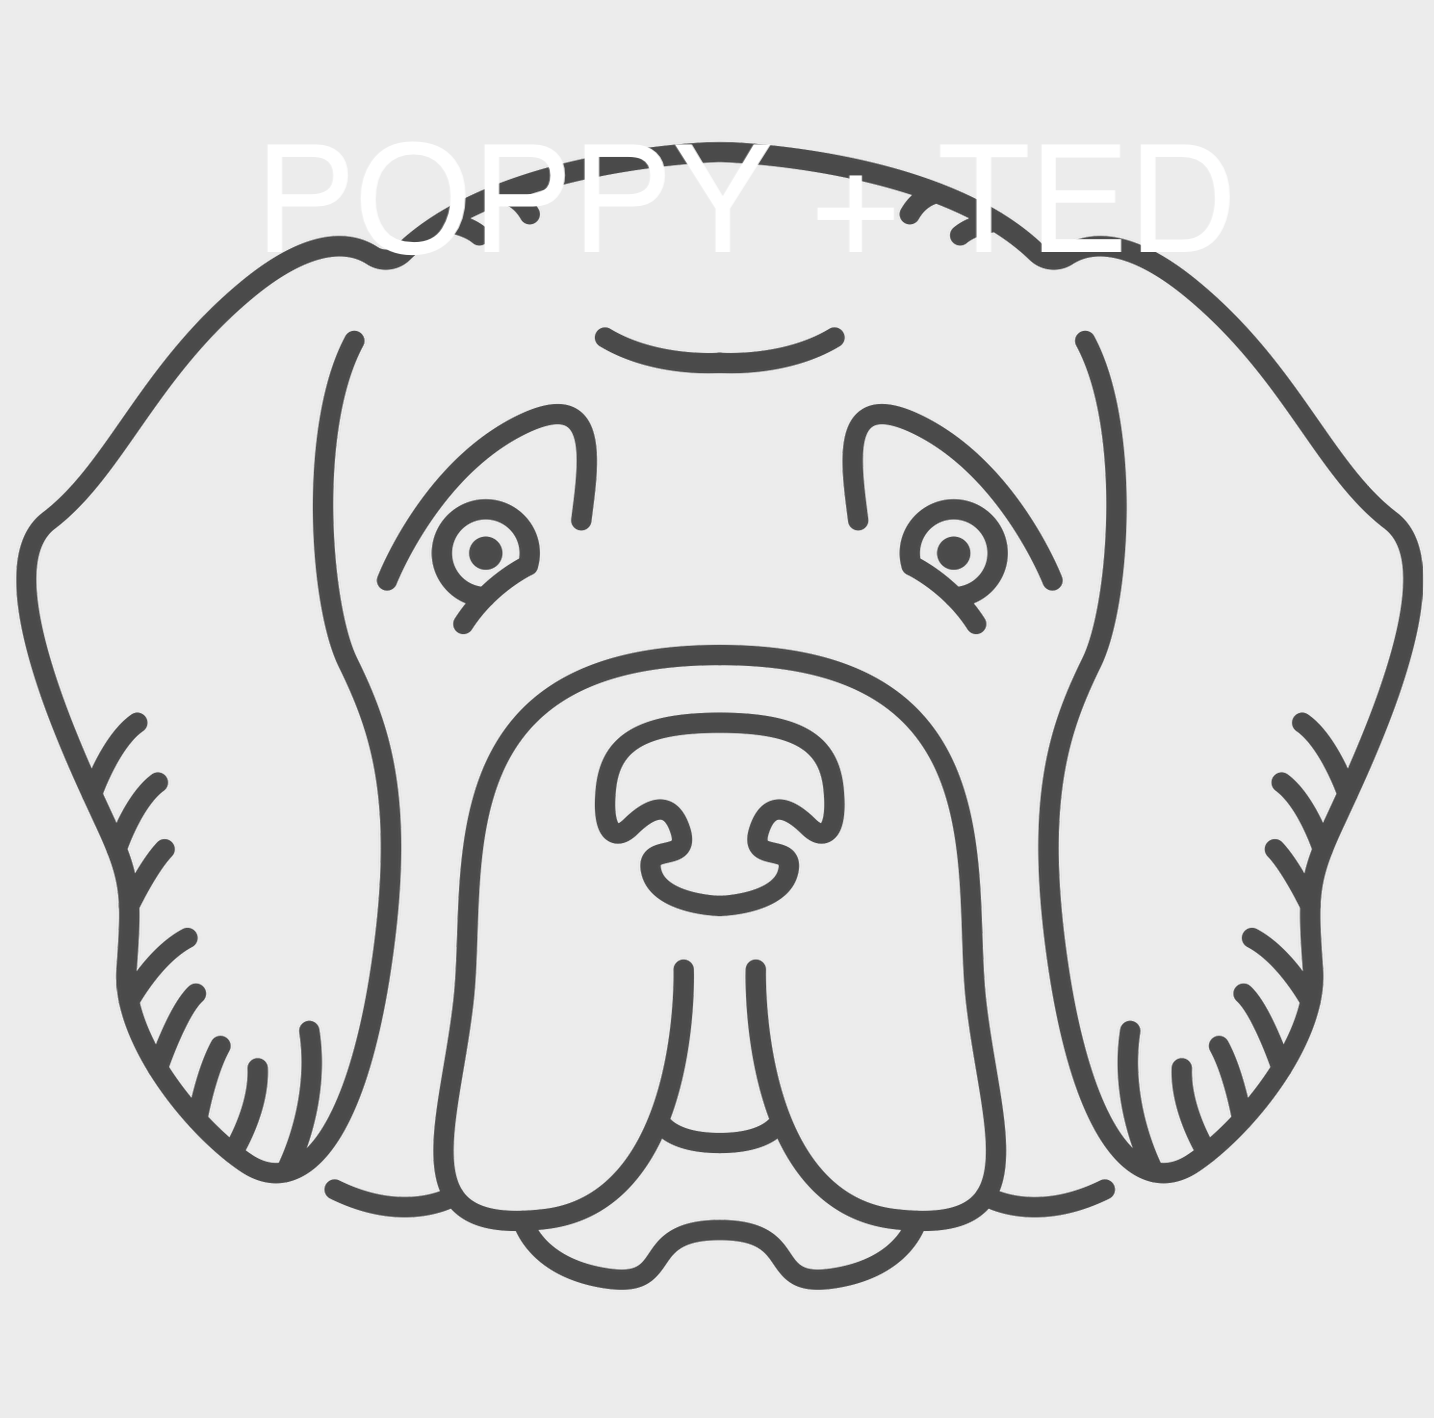 Personalised Dog Breed ID Tag | Rose Gold